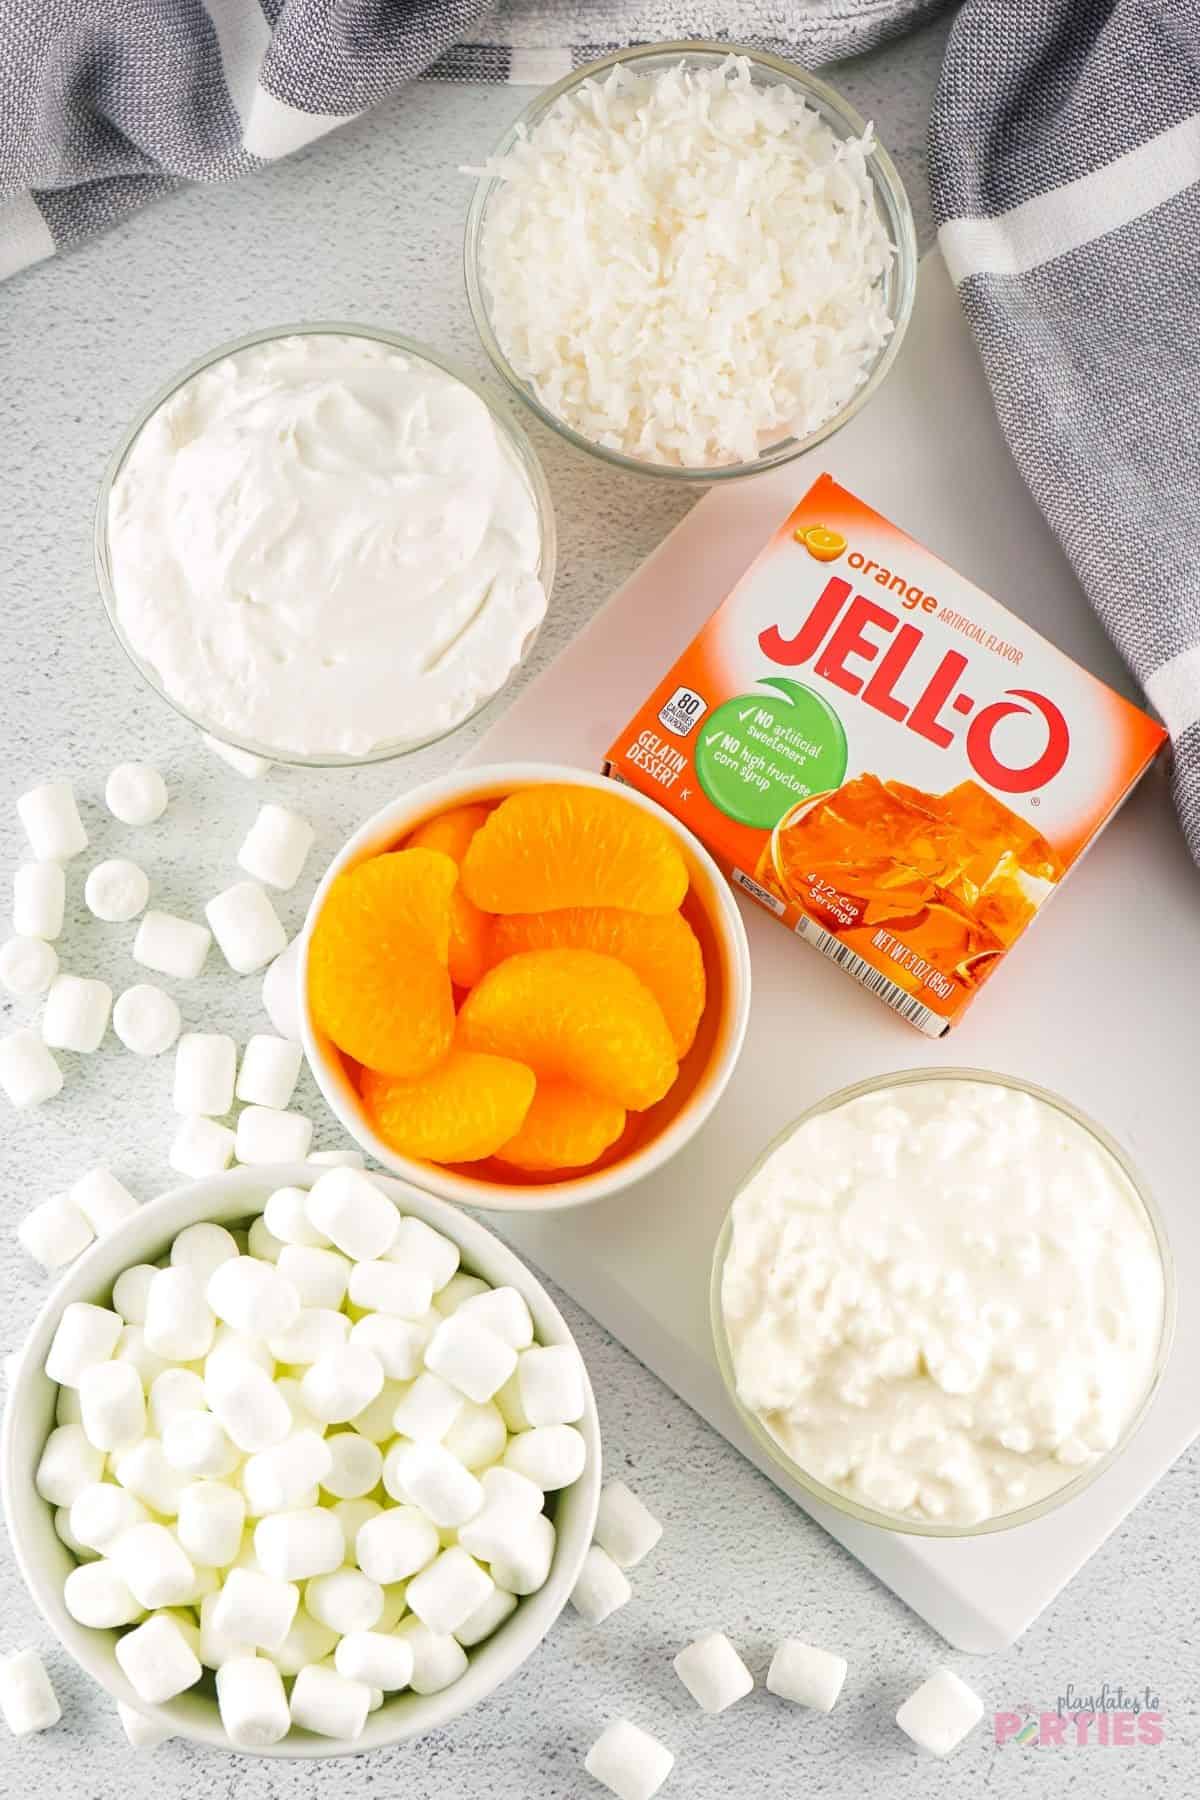 Ingredients on a table including orange jello, mandarins, marshmallows, coconut, cool whip, and cottage cheese.